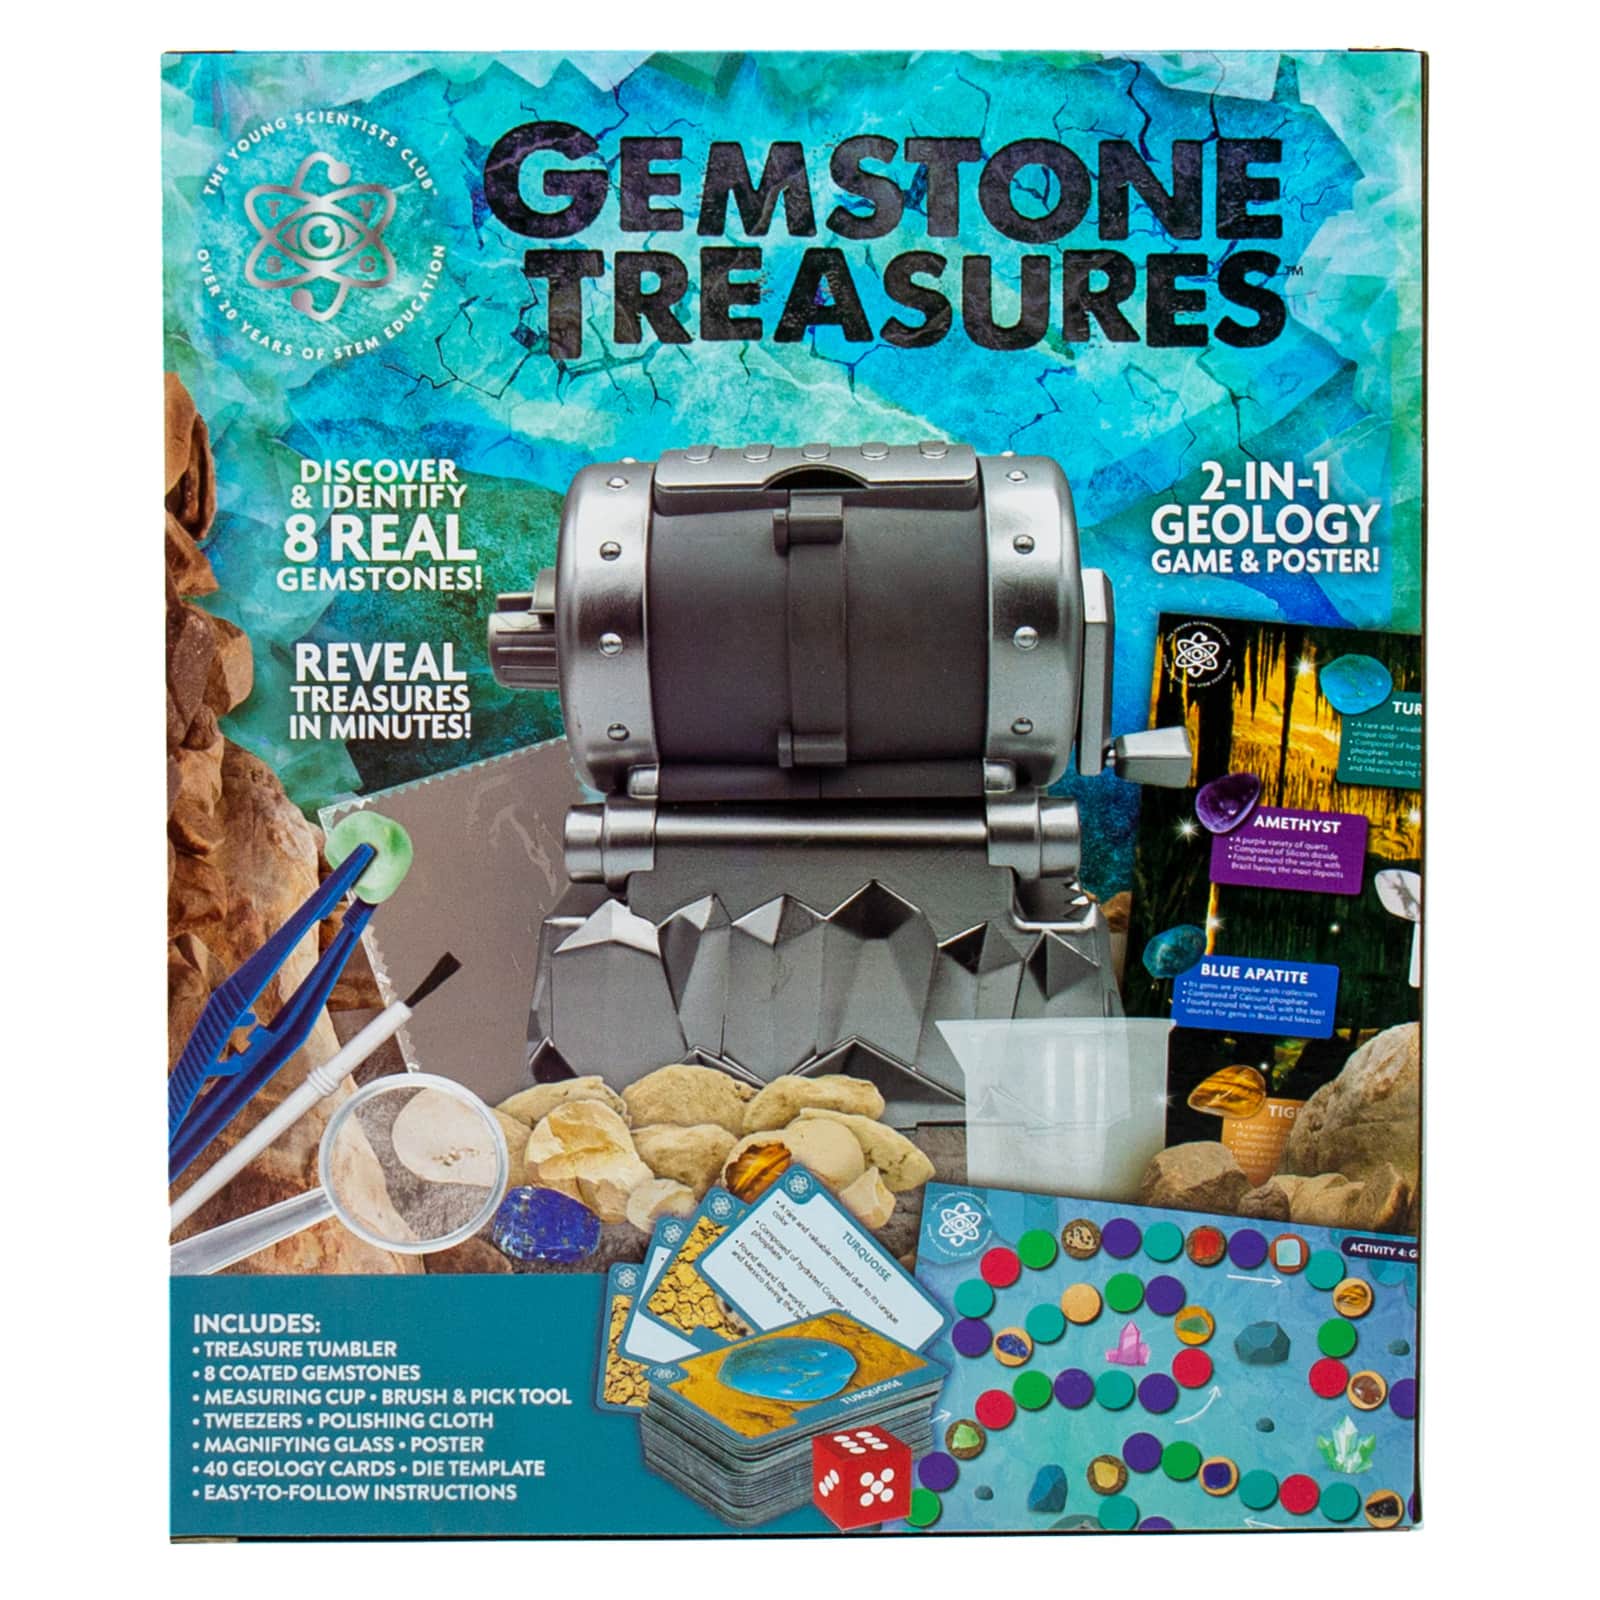 The Young Scientists Club Gemstone Treasures